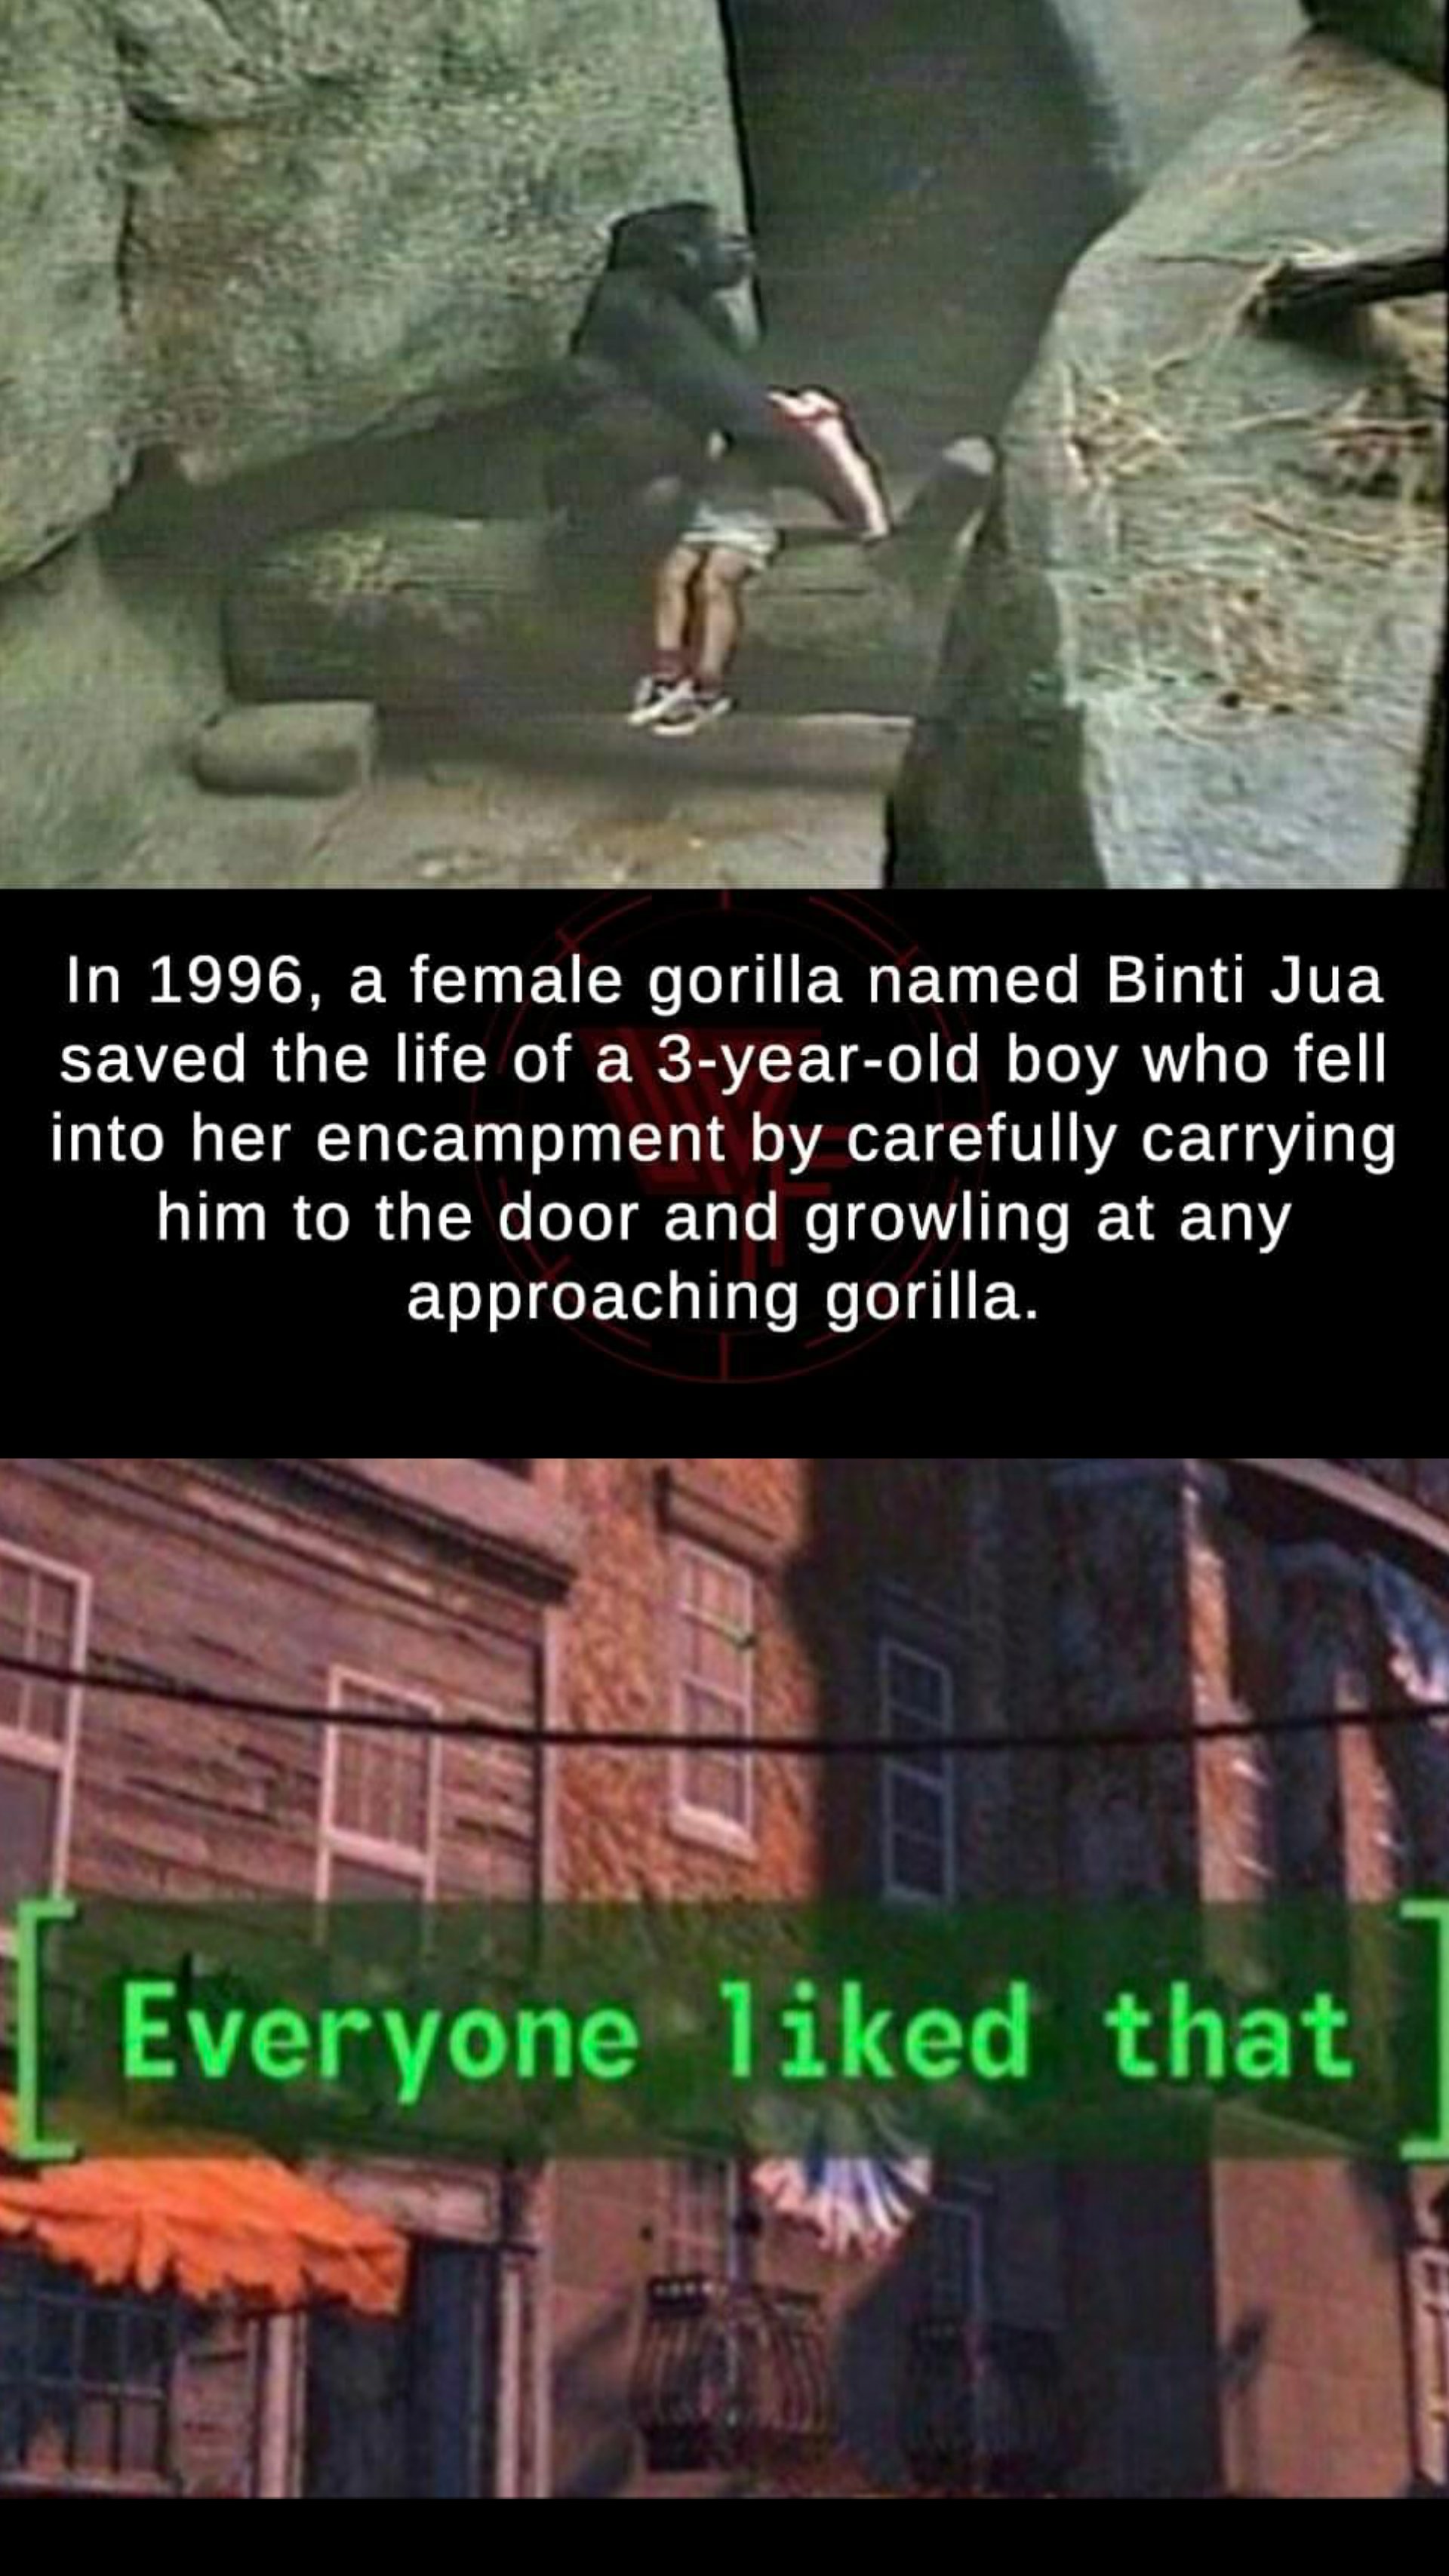 wholesome 100 keanu chungus - In 1996, a female gorilla named Binti Jua saved the life of a 3yearold boy who fell into her encampment by carefully carrying him to the door and growling at any approaching gorilla. Everyone d that